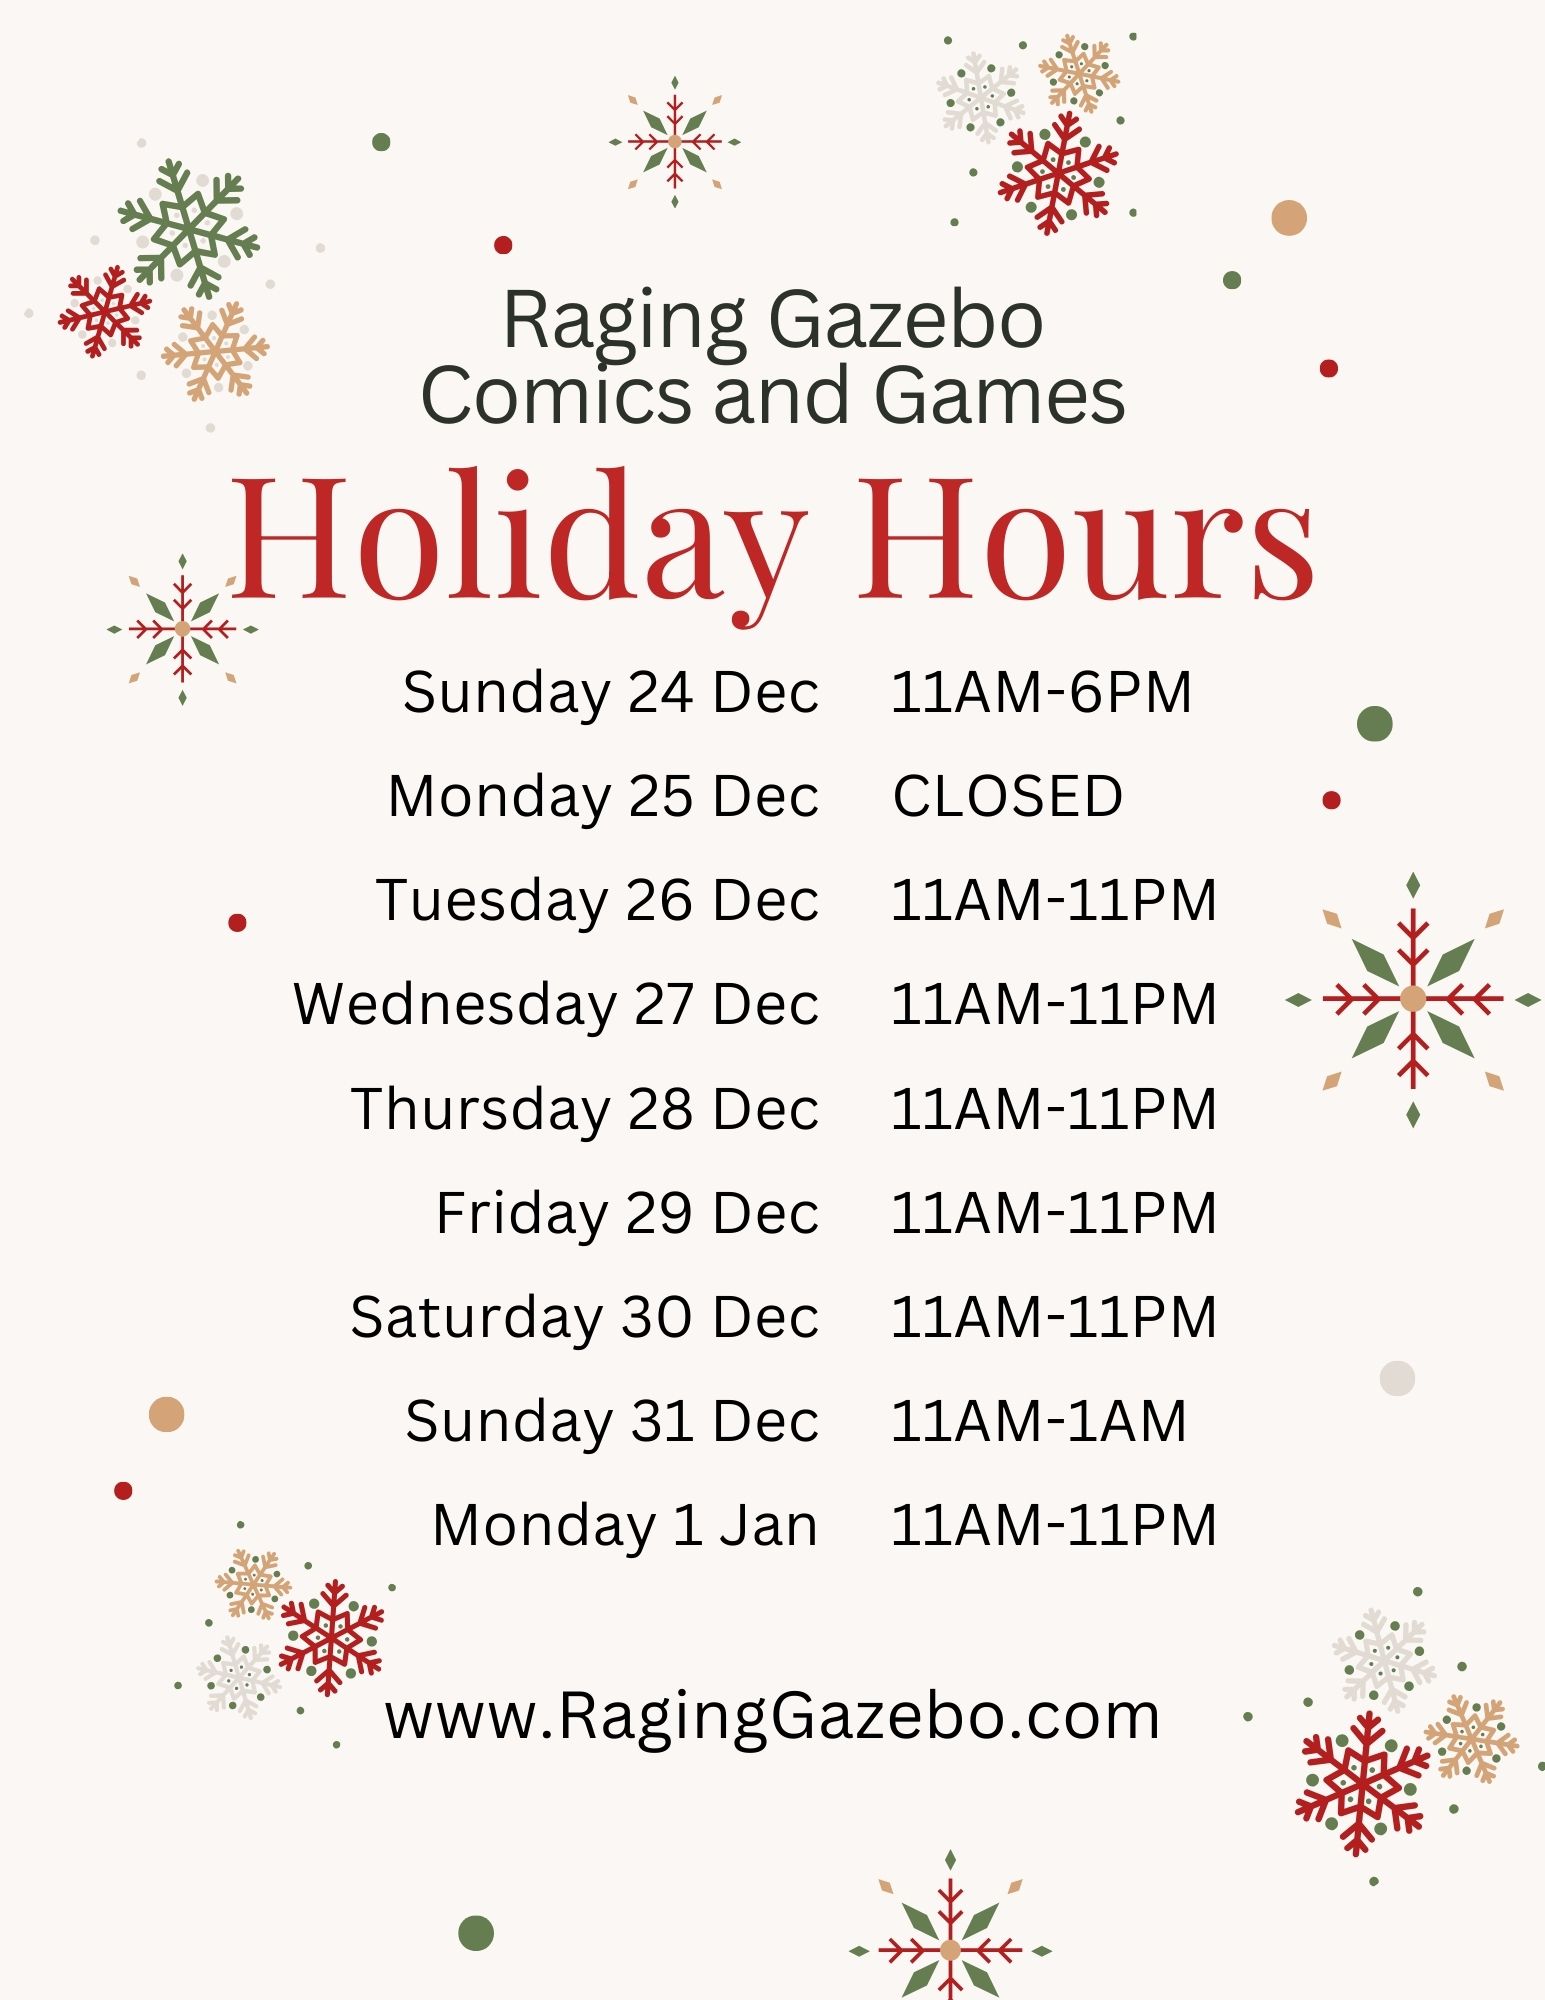 Holiday Hours, December 24th 11am-6pm, December 25th Closed, December 27th-30th 11am-11pm December 31st 11am-1am